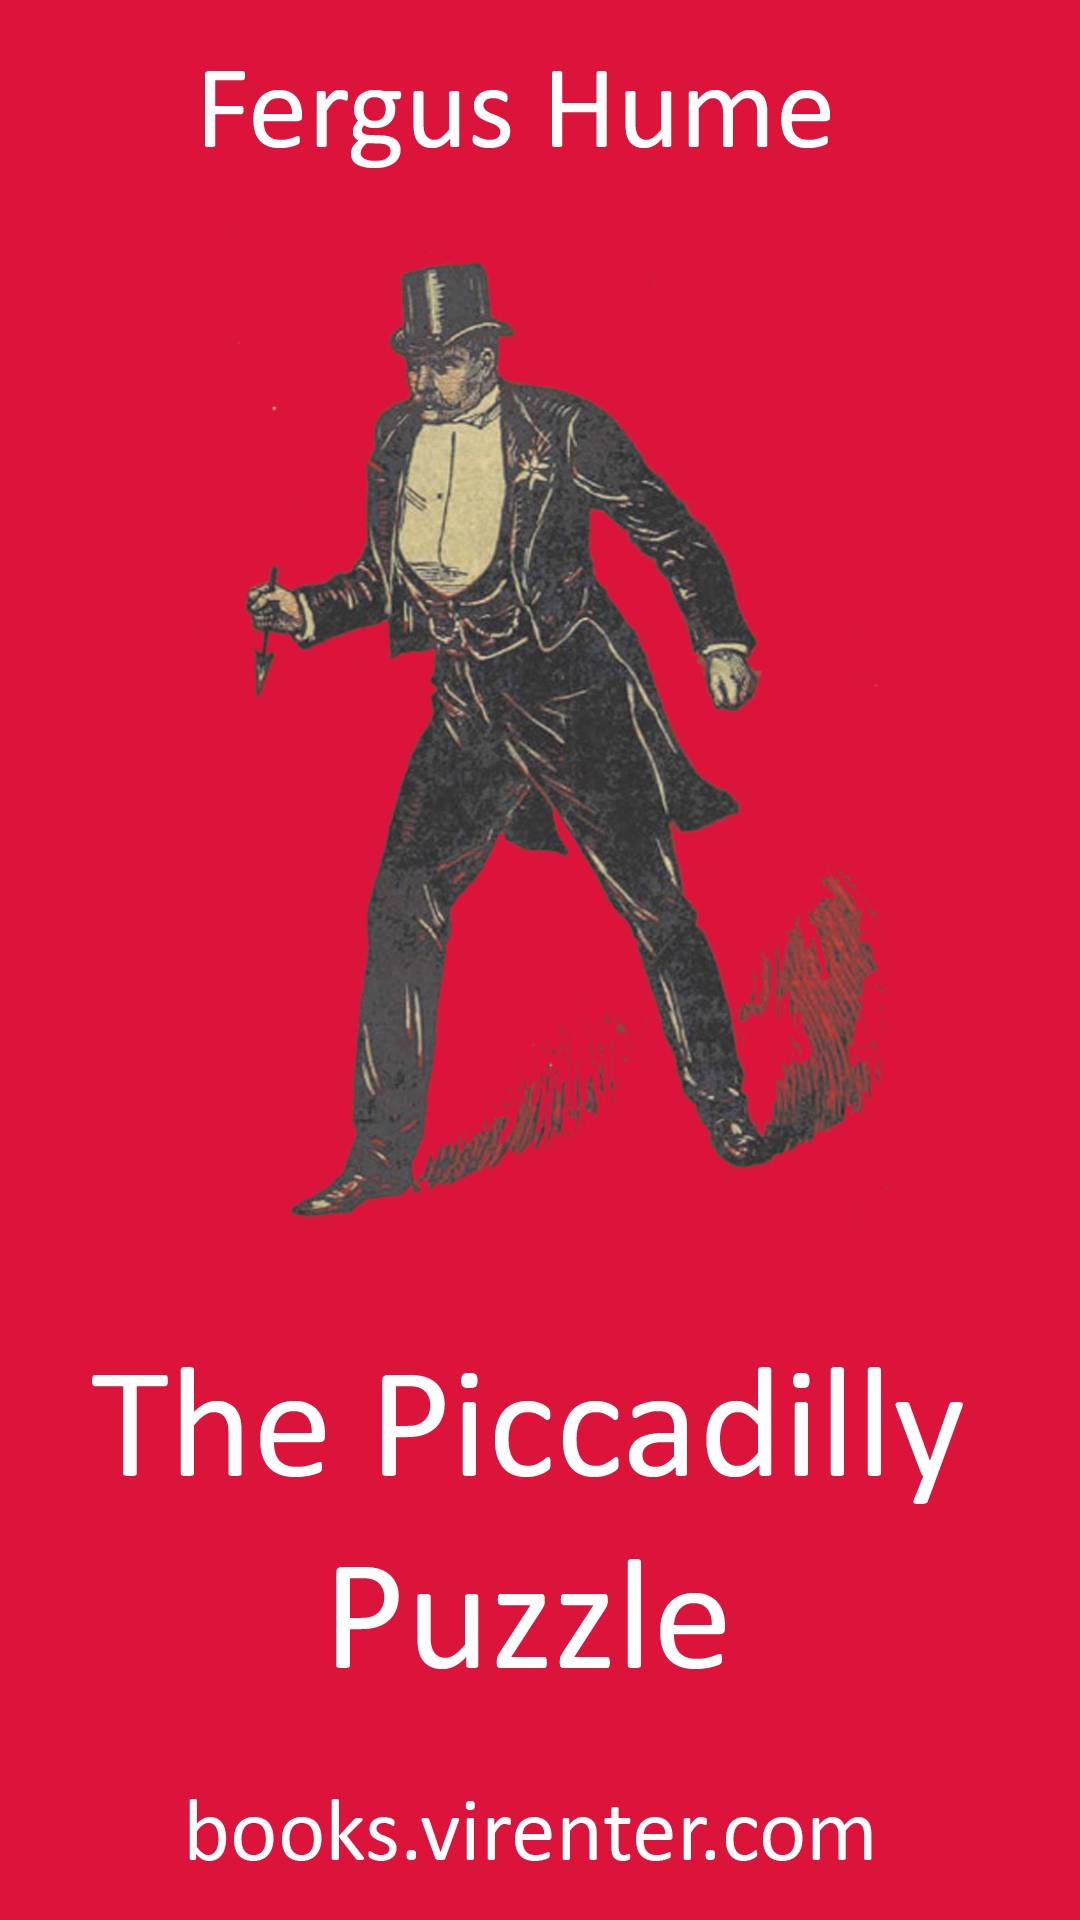 Fergus Hume - The Piccadilly Puzzle